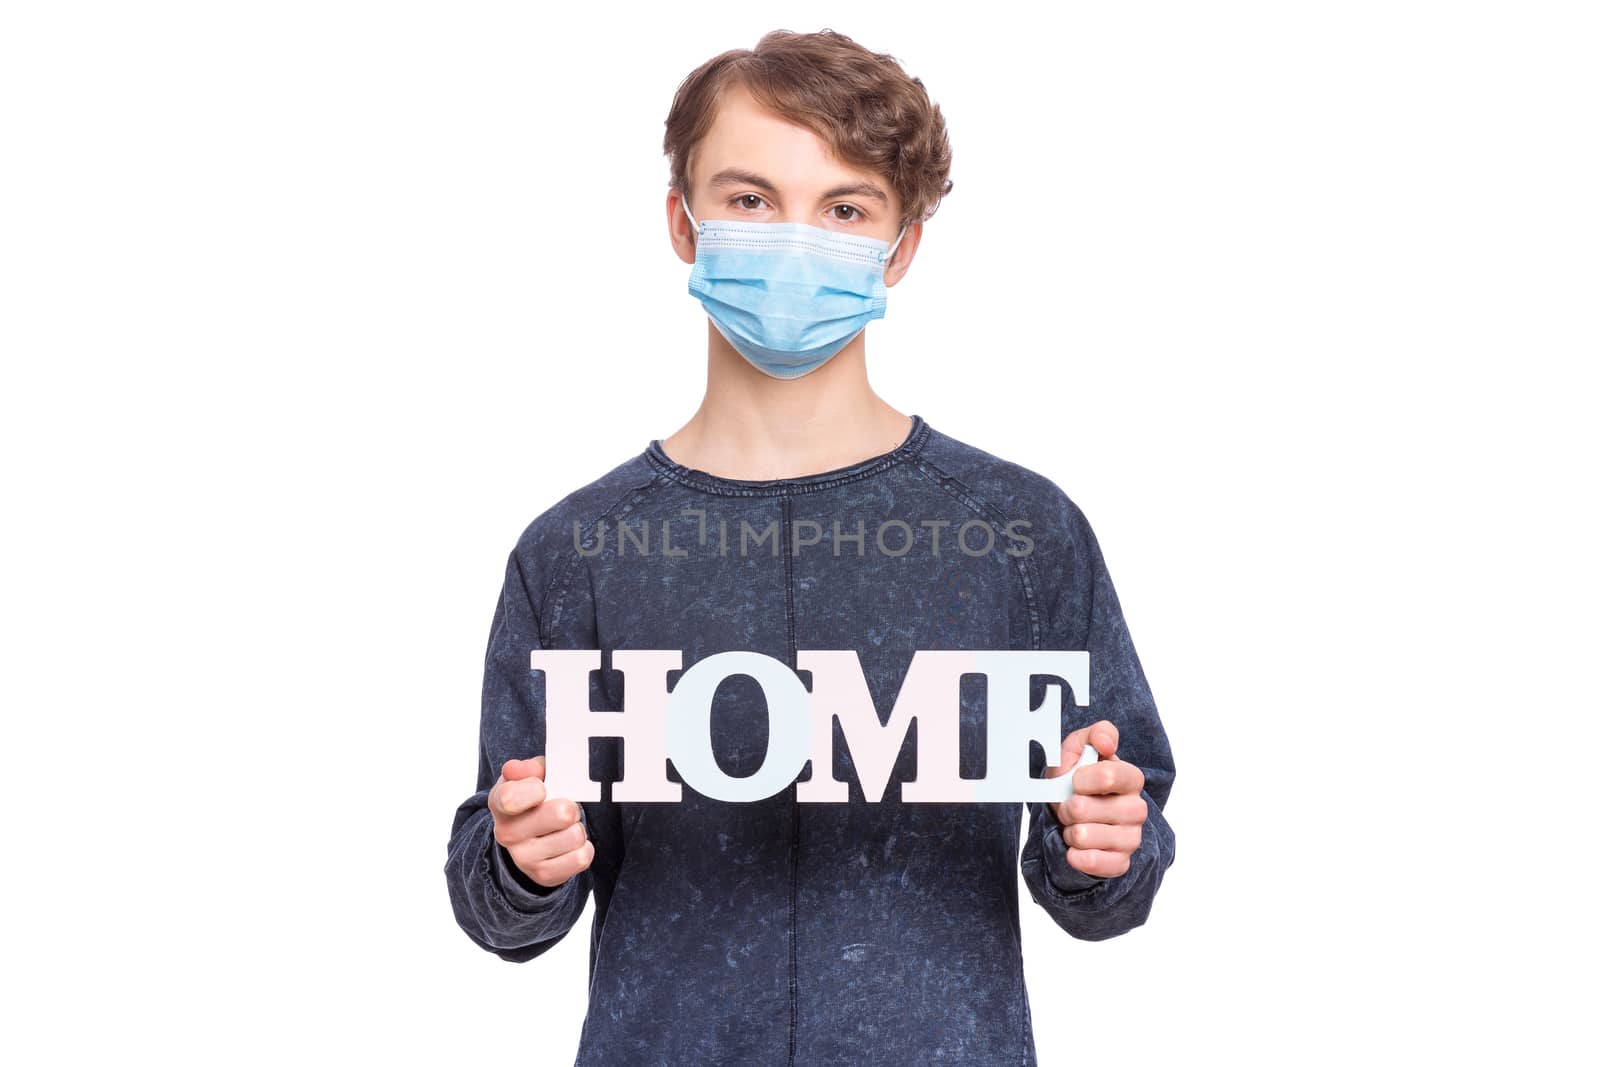 Concept of coronavirus quarantine. Child wearing medical protective face mask during flu virus, holds word Home - message for people to stay at home. COVID-19 - self isolation. Boy isolated on white.